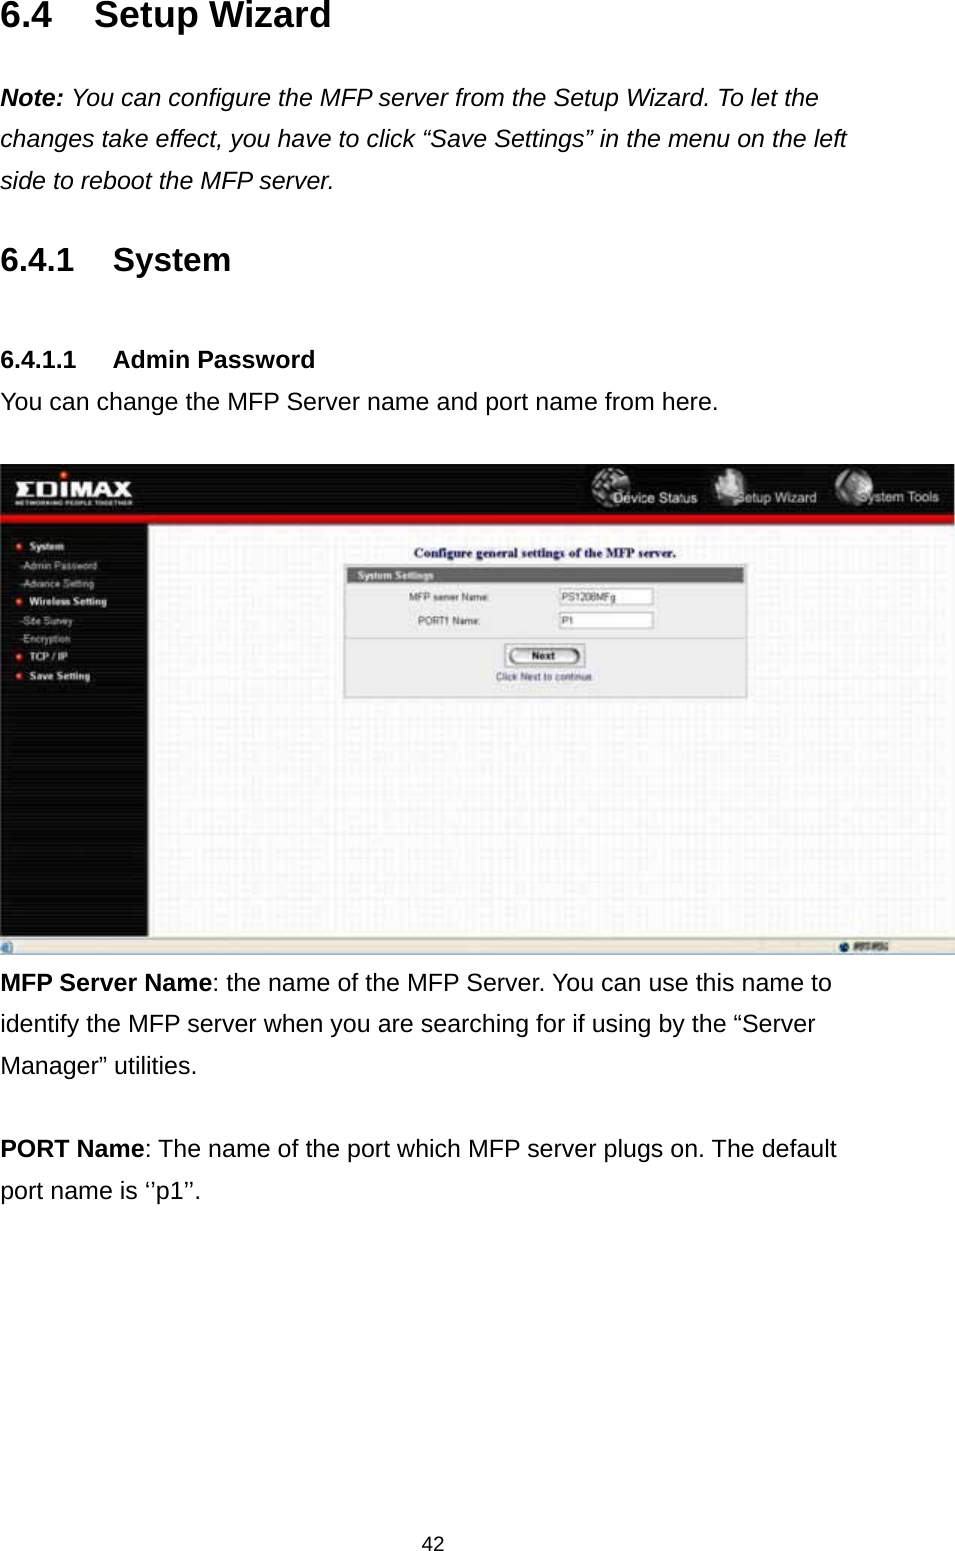 42 6.4 Setup Wizard Note: You can configure the MFP server from the Setup Wizard. To let the changes take effect, you have to click “Save Settings” in the menu on the left side to reboot the MFP server.  6.4.1 System   6.4.1.1 Admin Password You can change the MFP Server name and port name from here.  MFP Server Name: the name of the MFP Server. You can use this name to identify the MFP server when you are searching for if using by the “Server Manager” utilities.  PORT Name: The name of the port which MFP server plugs on. The default port name is ‘’p1’’.        